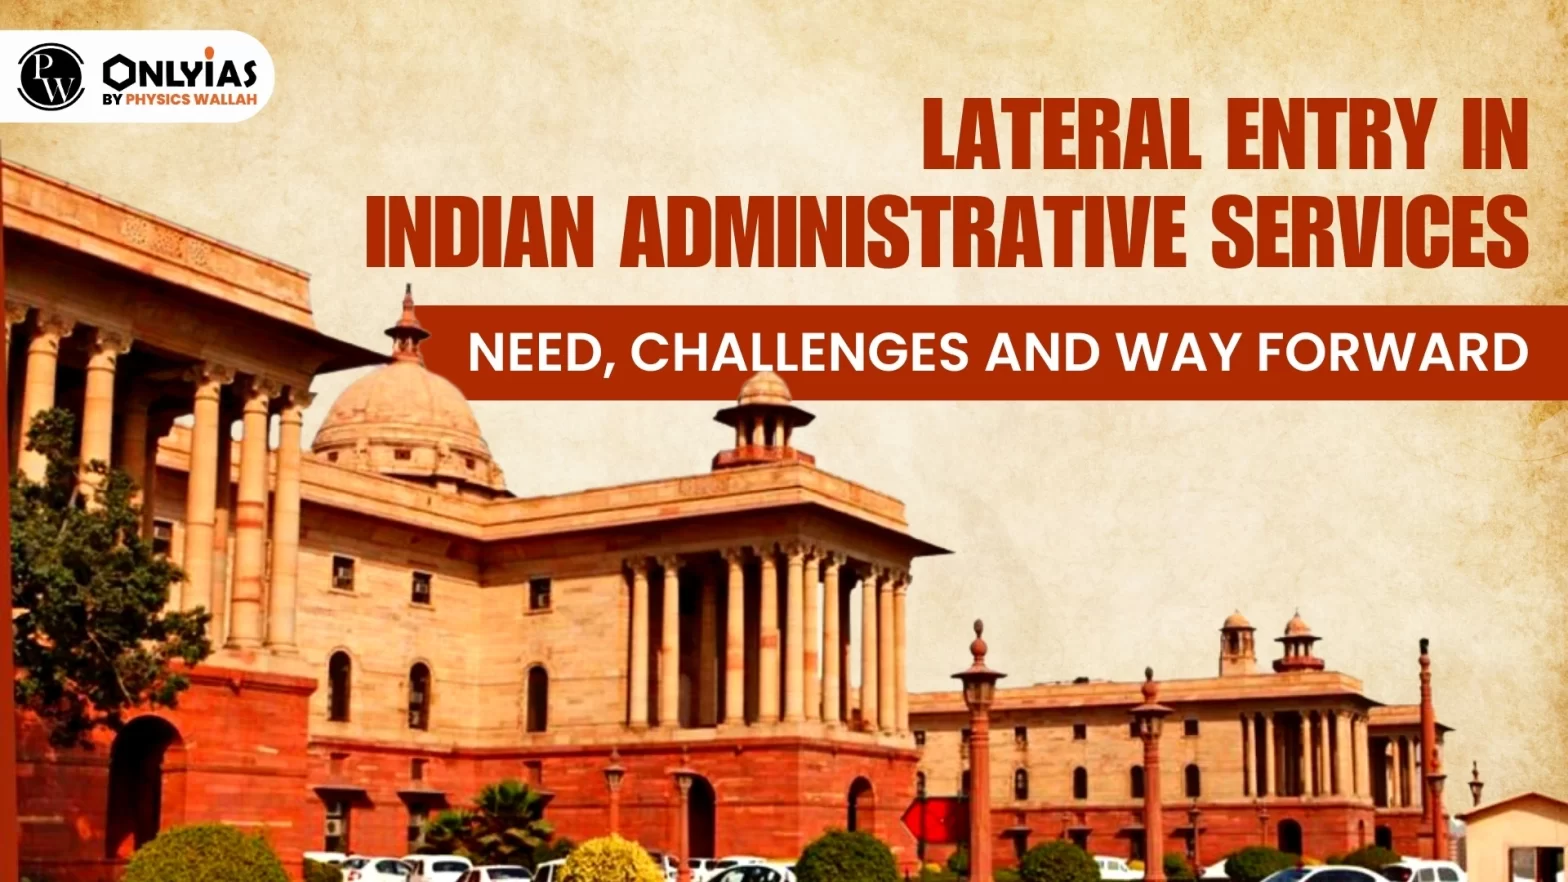 Lateral Entry in Indian Administrative Services: Need, Challenges and Way Forward